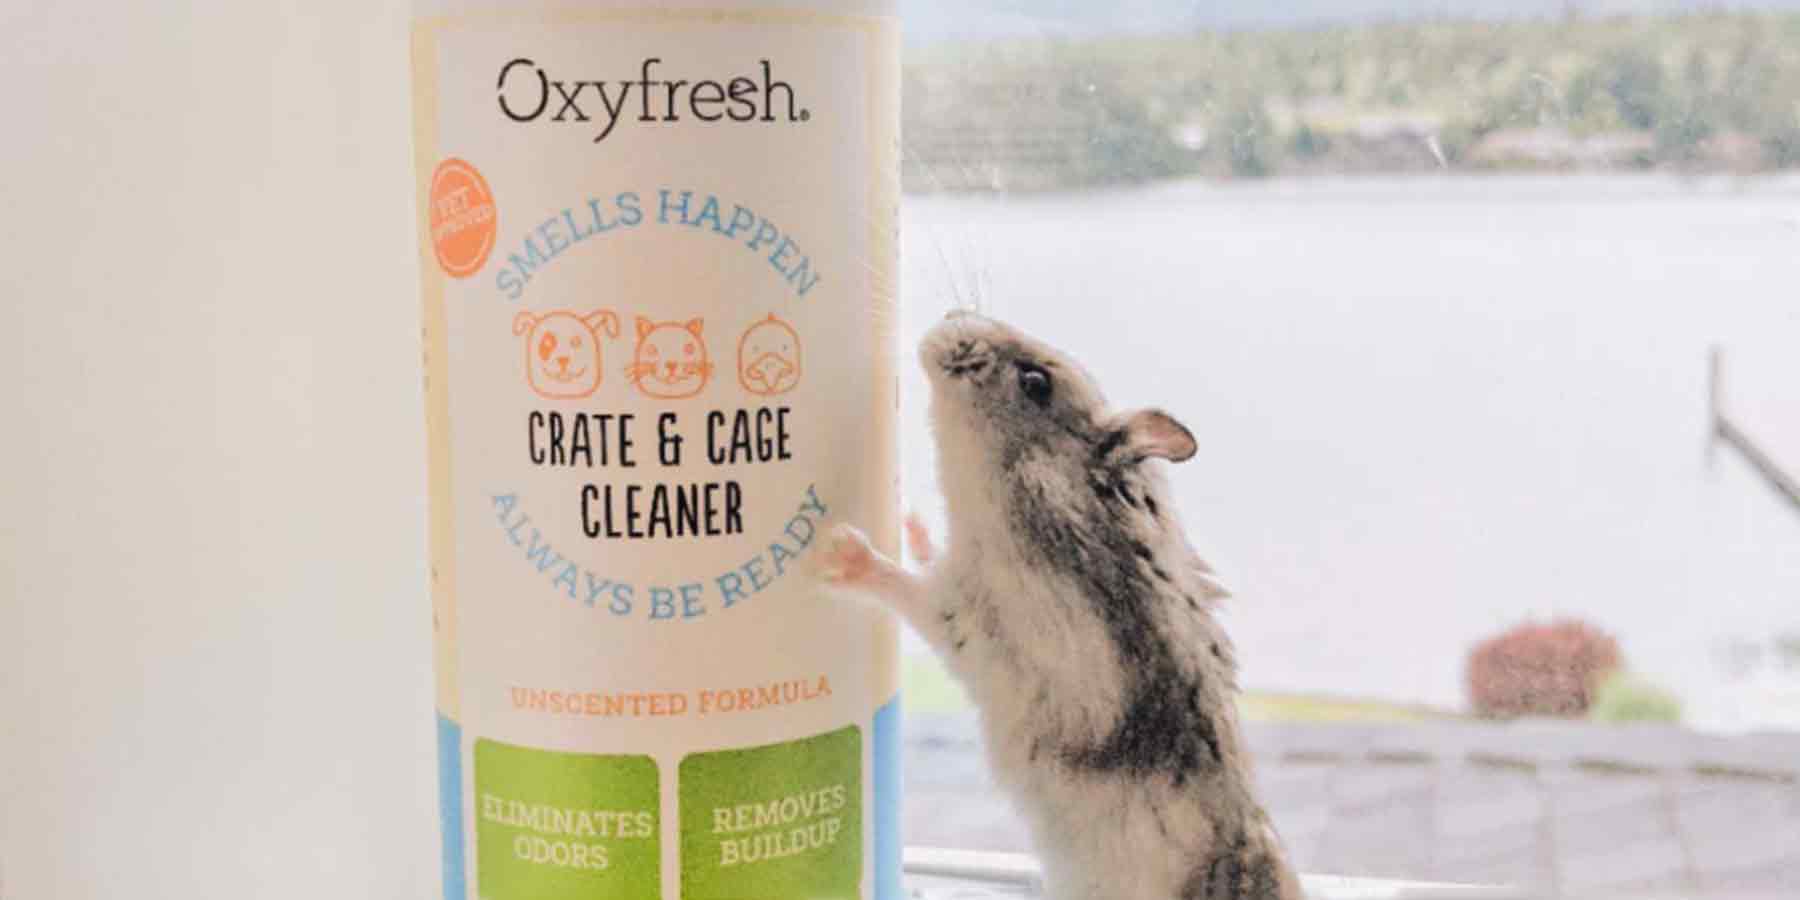 Social-Media-Post-From-Instagram-User-Theodore.the.fat.hamster-on-the-windowsill-exploring-the-oxyfresh-hamster-cage-cleaner-bottle-for-small-animal-cages-and-crates